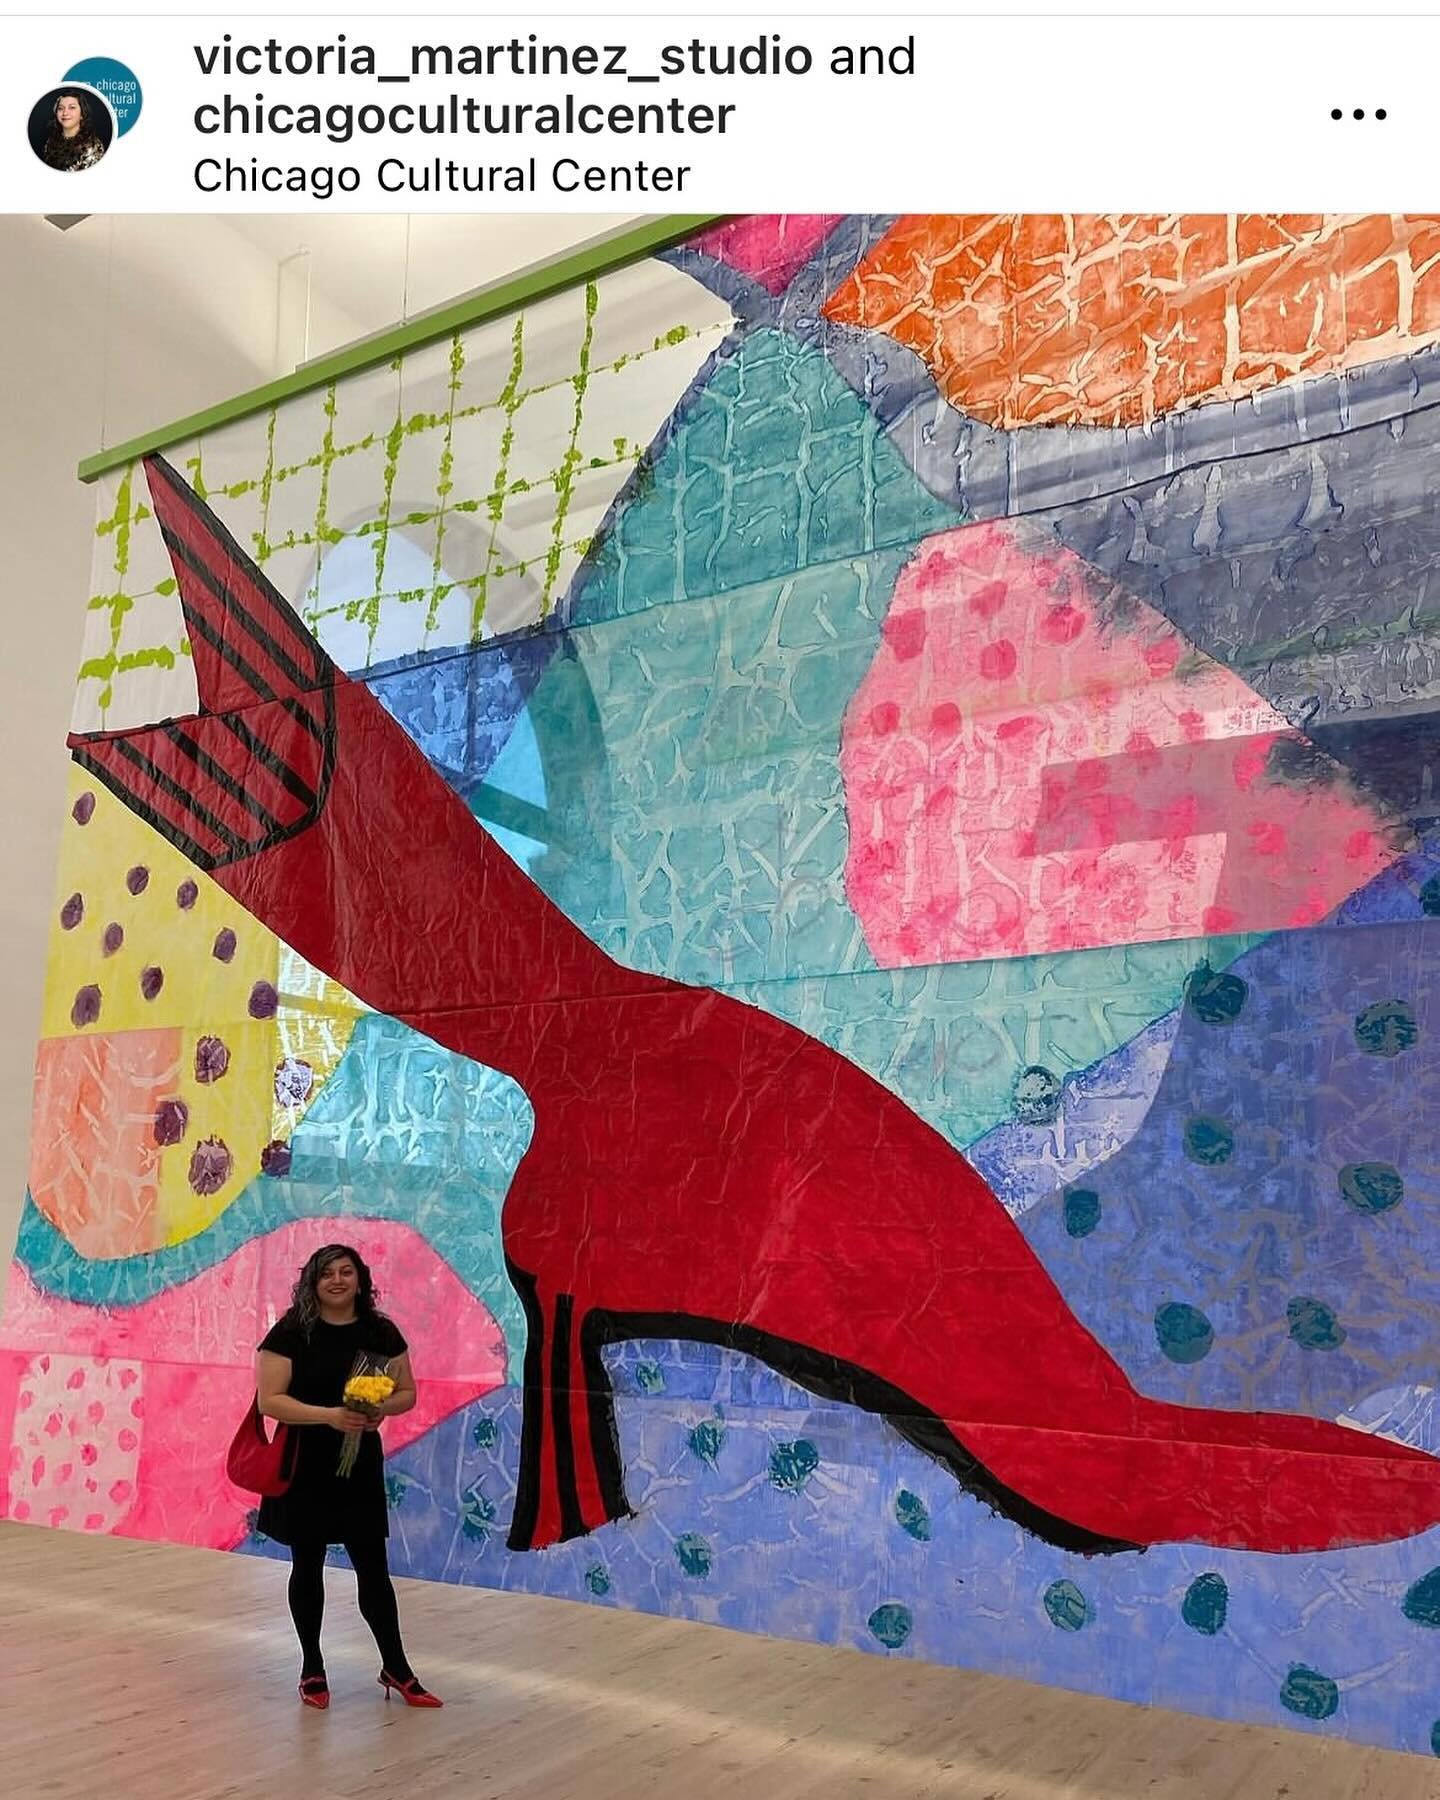 Shout out to Lab alum, @victoria_martinez_studio for what looks like a super stunning installation @chicagoculturalcenter  SEE &ldquo;Braiding Histories&rdquo; at the Chicago Cultural Center&hellip; Loving that color palette!!!